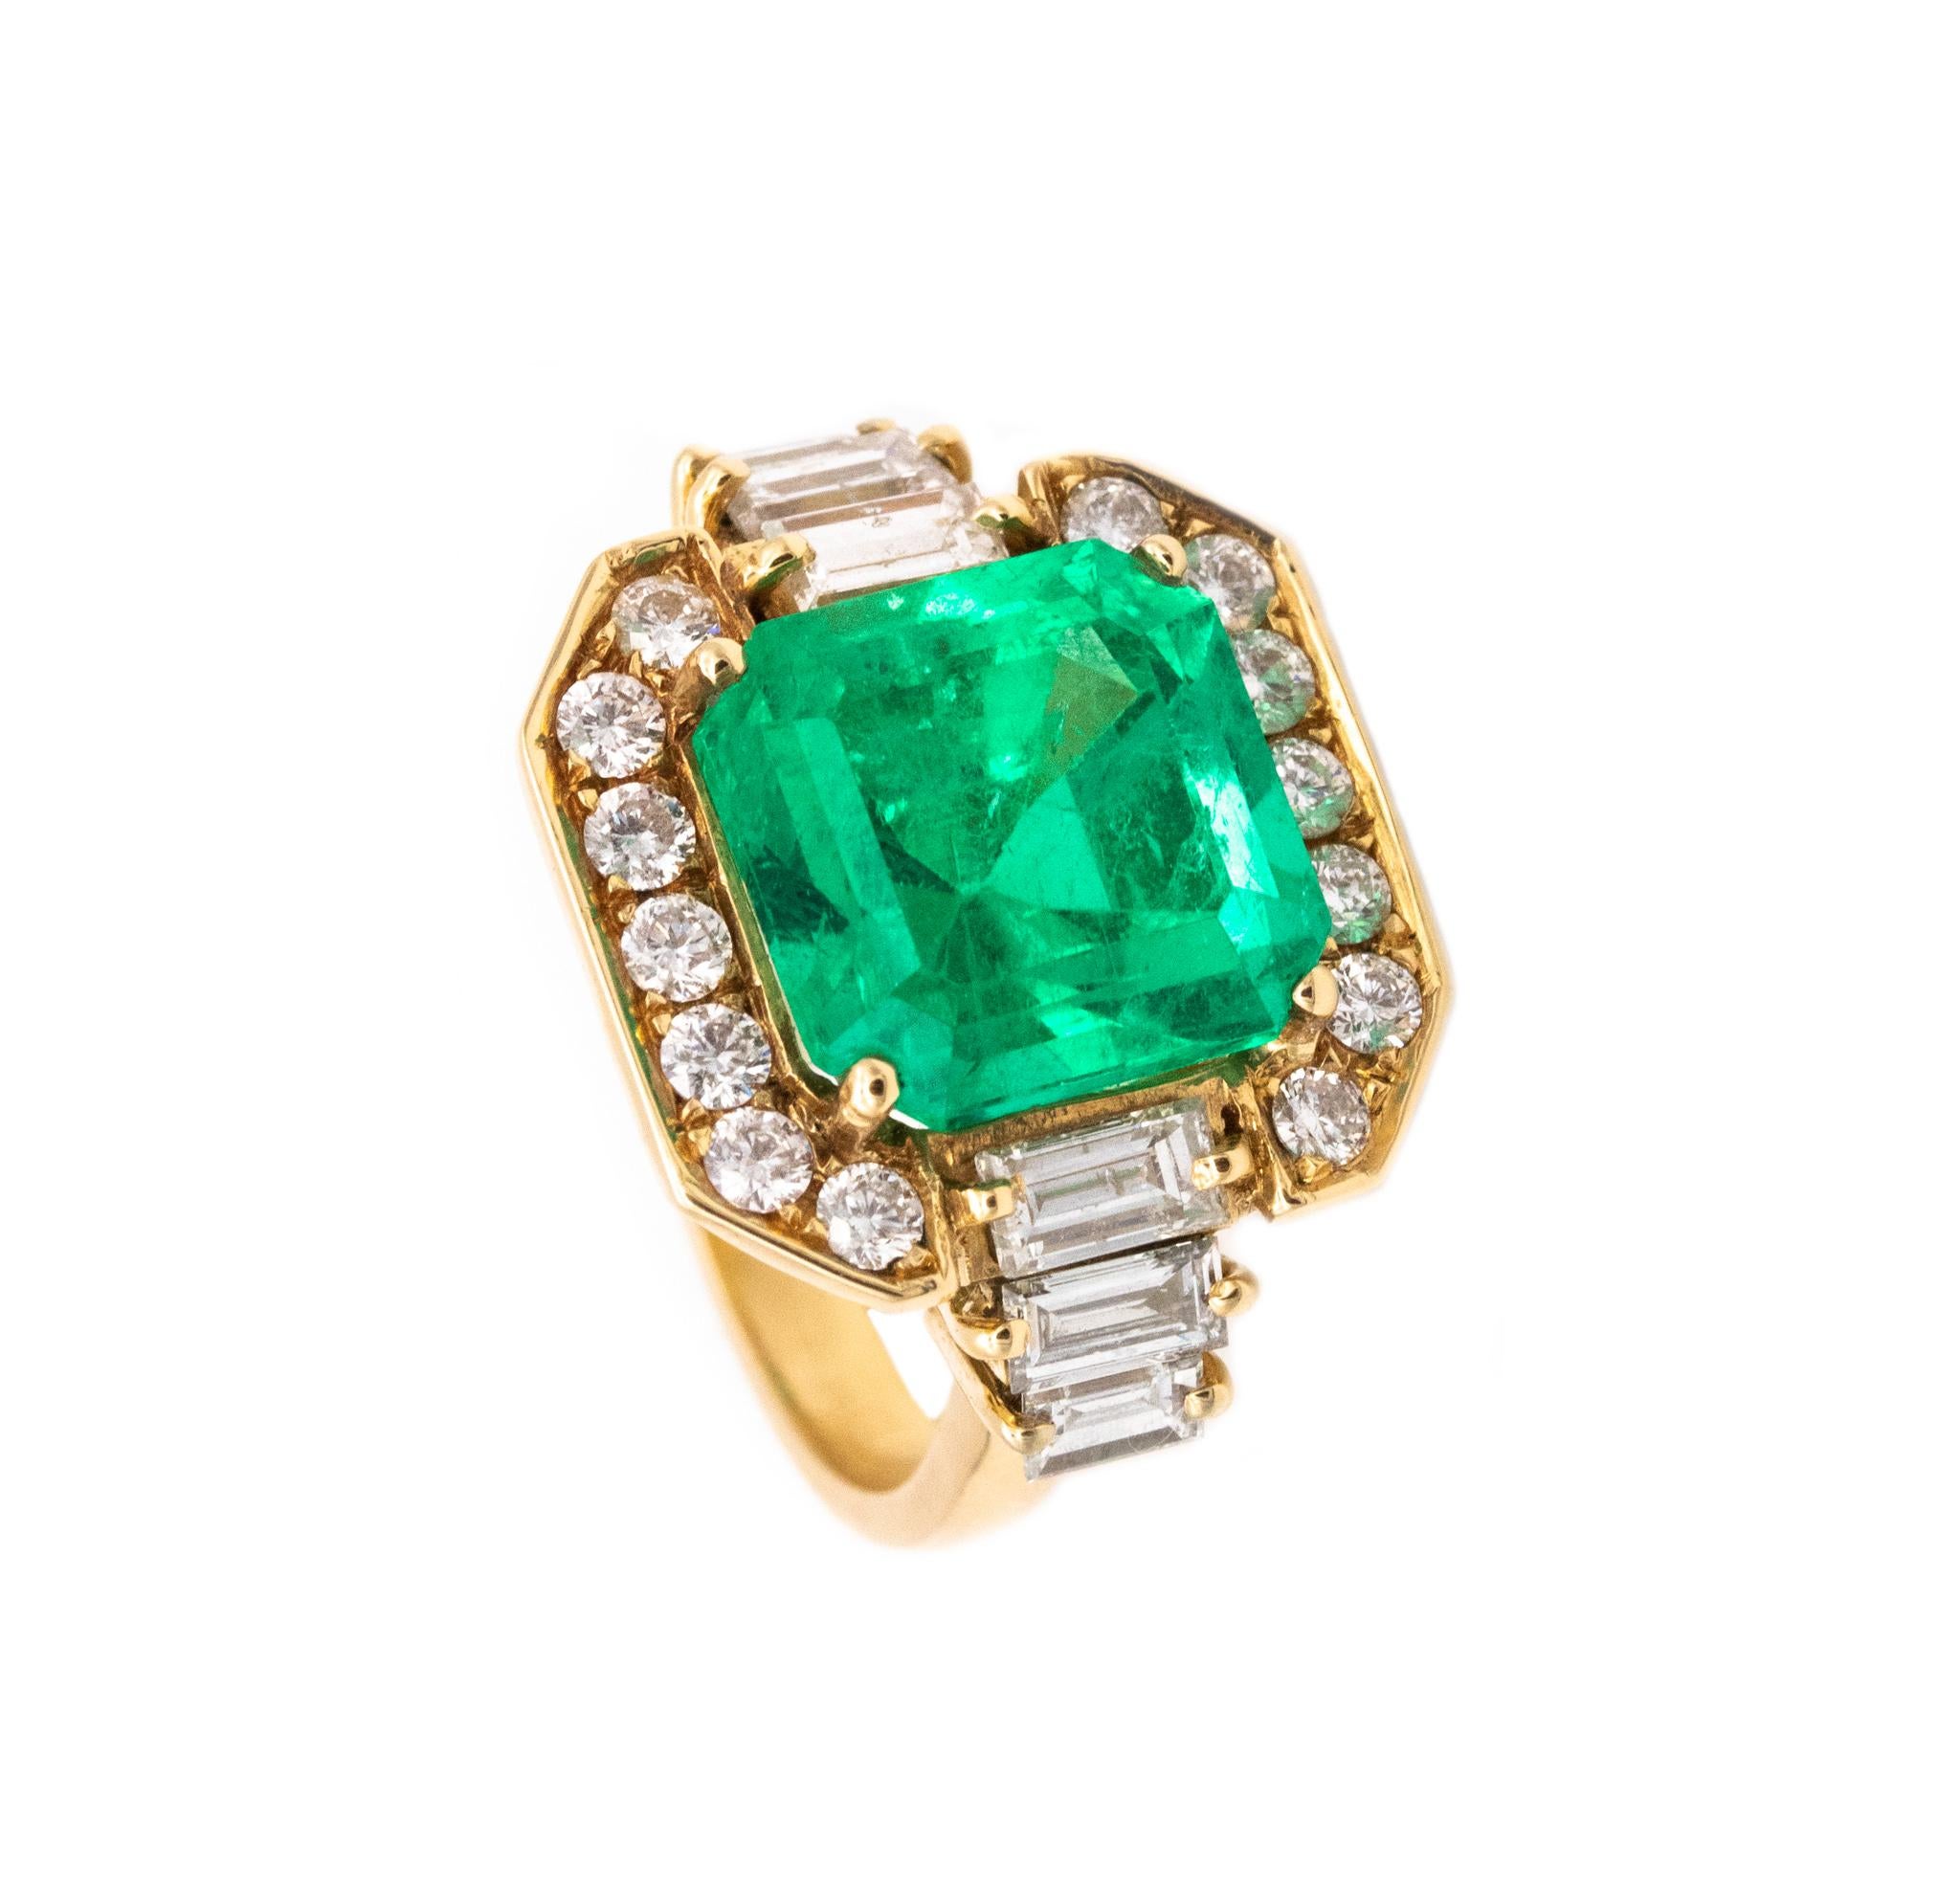 Emerald Cut Gia Certified Cocktail Ring 18Kt Gold With 10.32 Ctw Colombian Emerald & Diamond For Sale